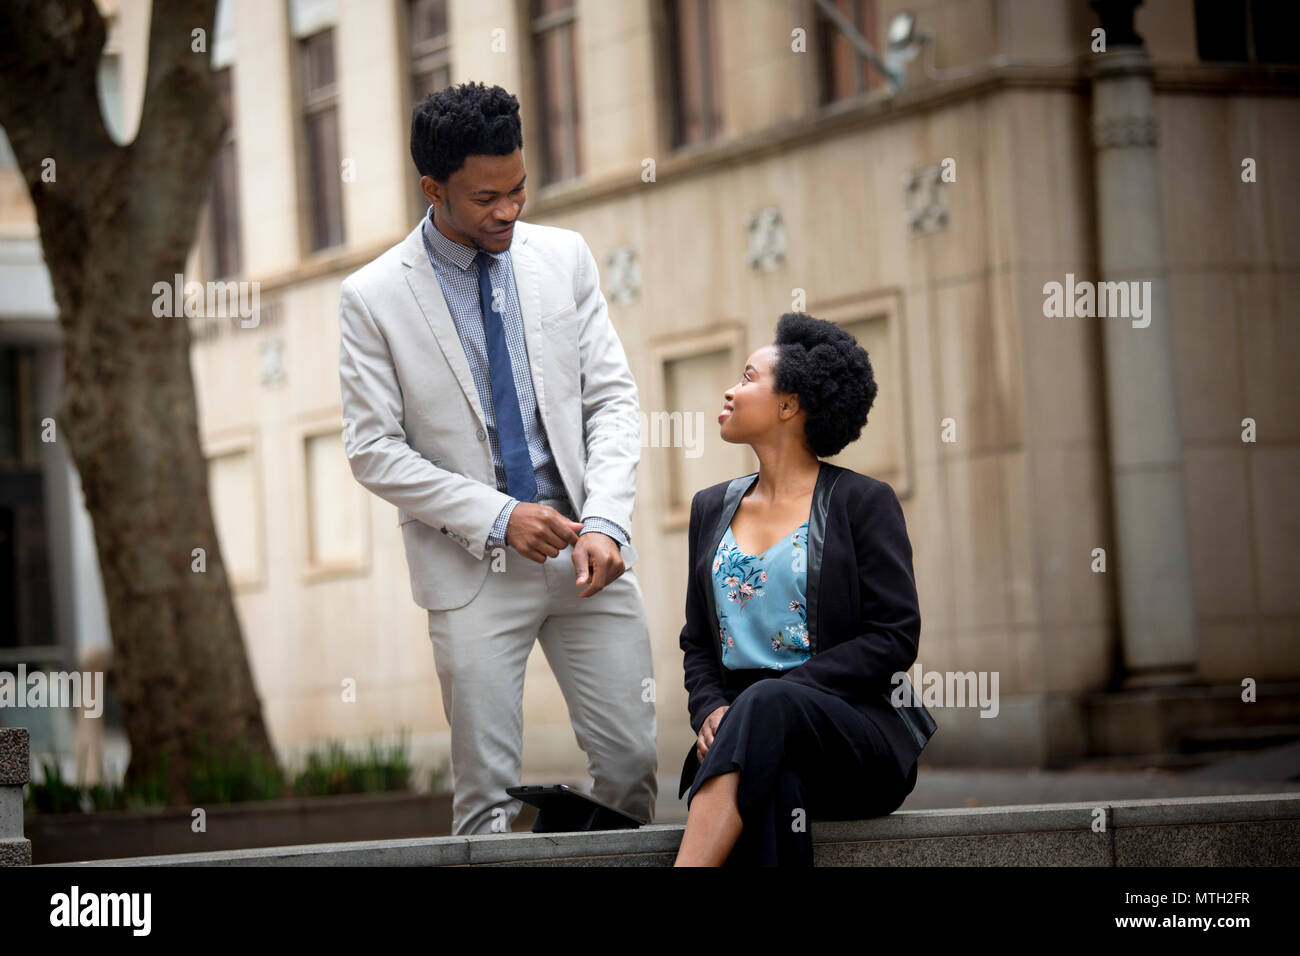 Business man and woman greeting each other Stock Photo